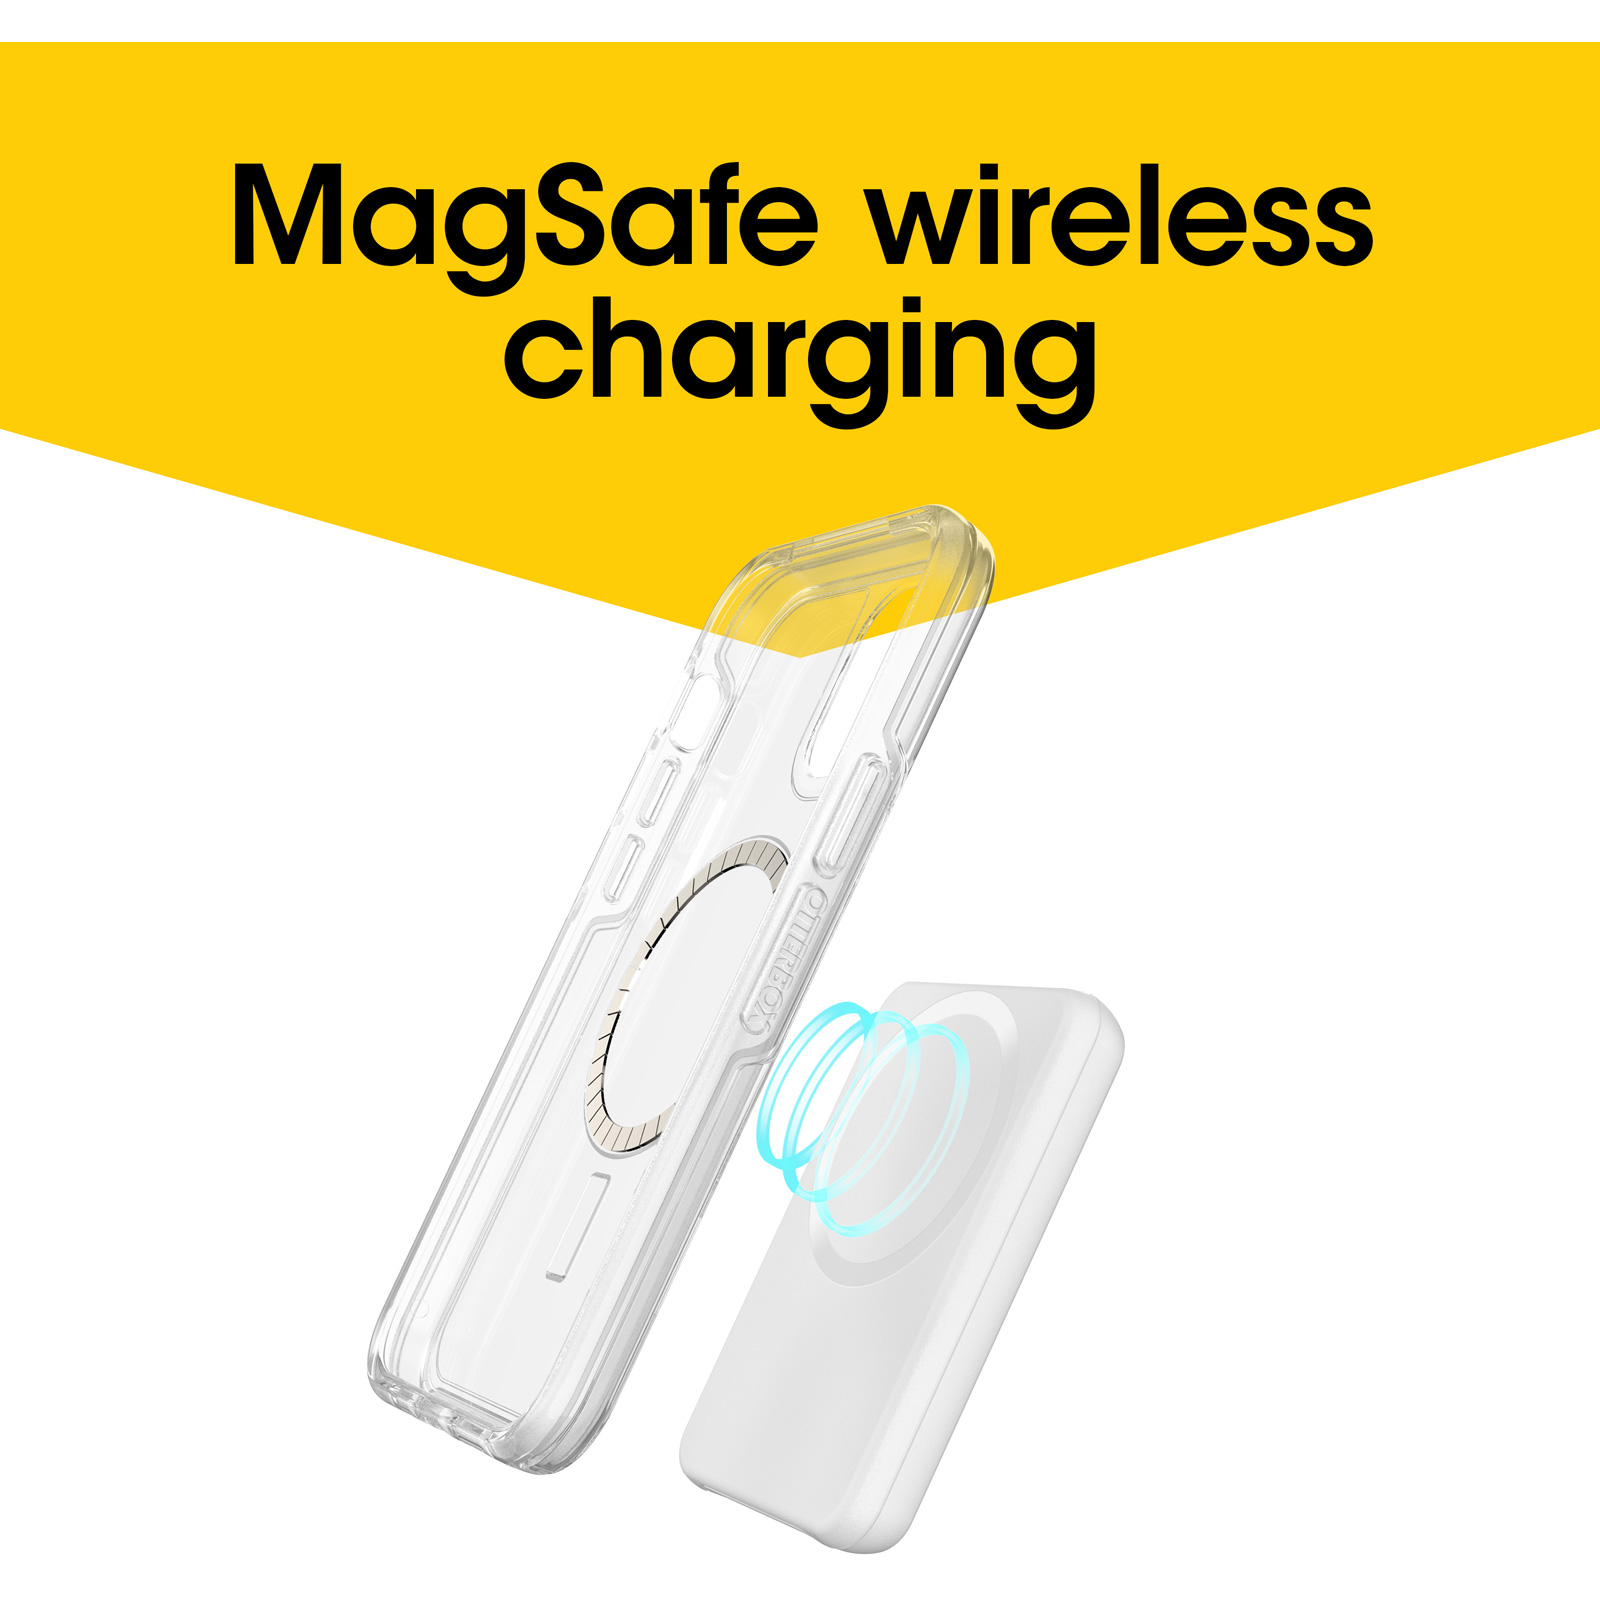 OtterBox Wireless Power Bank for MagSafe Is Great Thanks to a Neat Trick